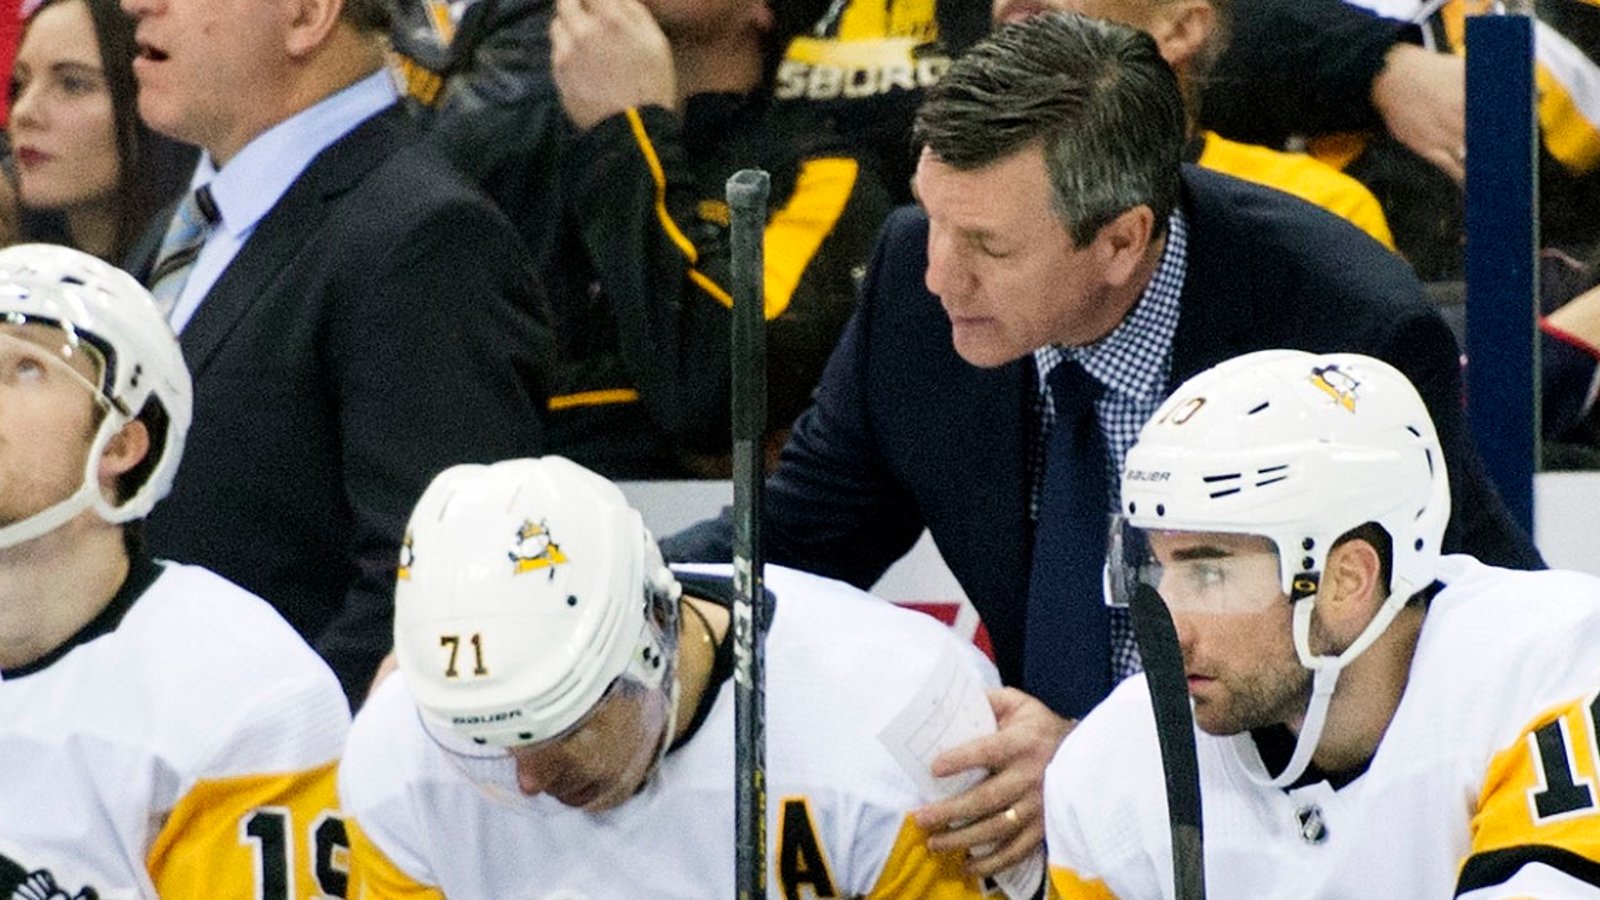 Mike Sullivan comments on recent trades following his new deal.